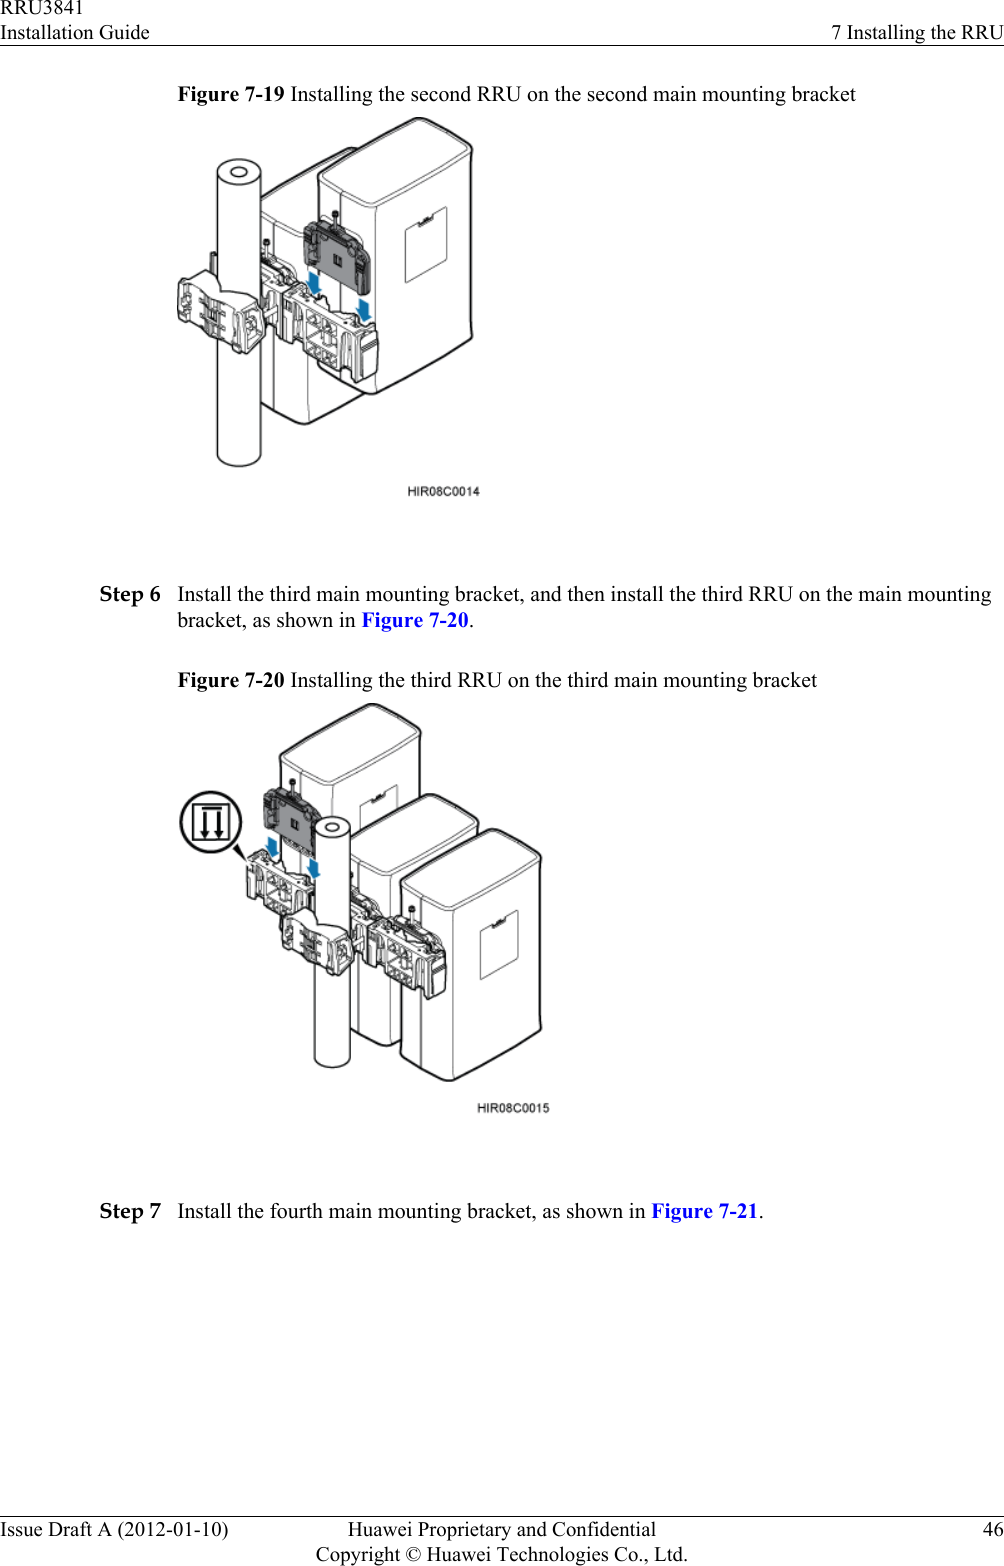 Figure 7-19 Installing the second RRU on the second main mounting bracket Step 6 Install the third main mounting bracket, and then install the third RRU on the main mountingbracket, as shown in Figure 7-20.Figure 7-20 Installing the third RRU on the third main mounting bracket Step 7 Install the fourth main mounting bracket, as shown in Figure 7-21.RRU3841Installation Guide 7 Installing the RRUIssue Draft A (2012-01-10) Huawei Proprietary and ConfidentialCopyright © Huawei Technologies Co., Ltd.46